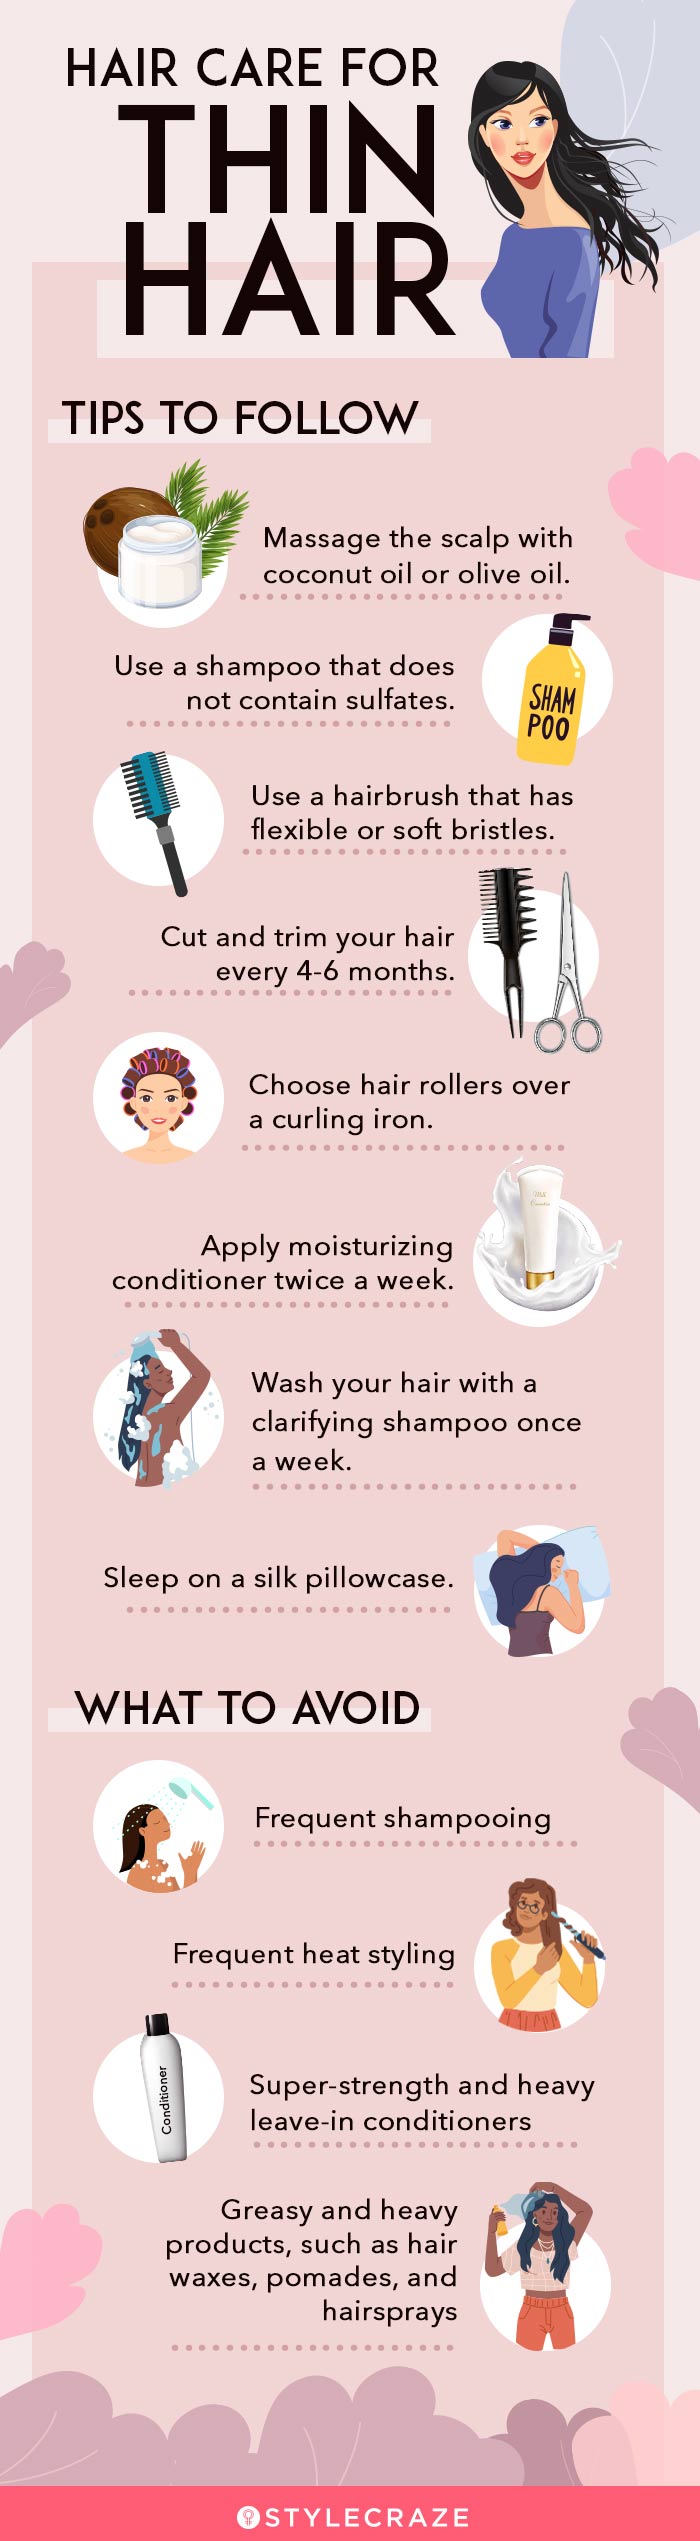 hair care for thin hair (infographic)